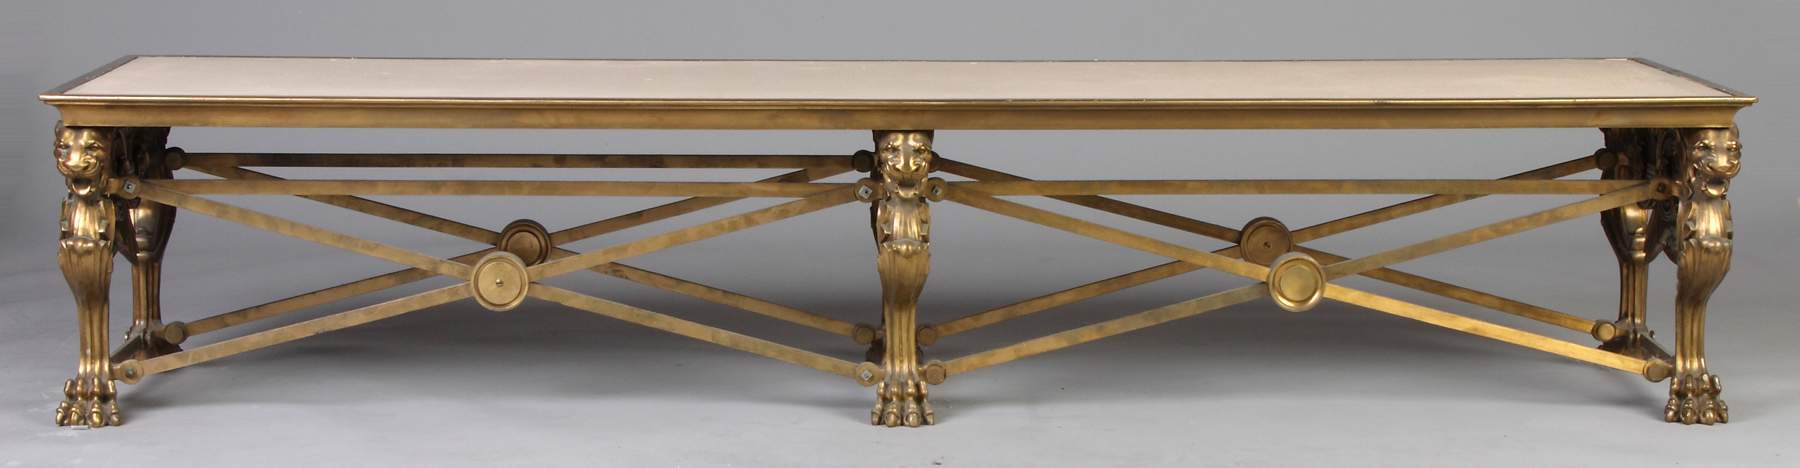 A Pair of American Lacquered Bronze Hall Benches